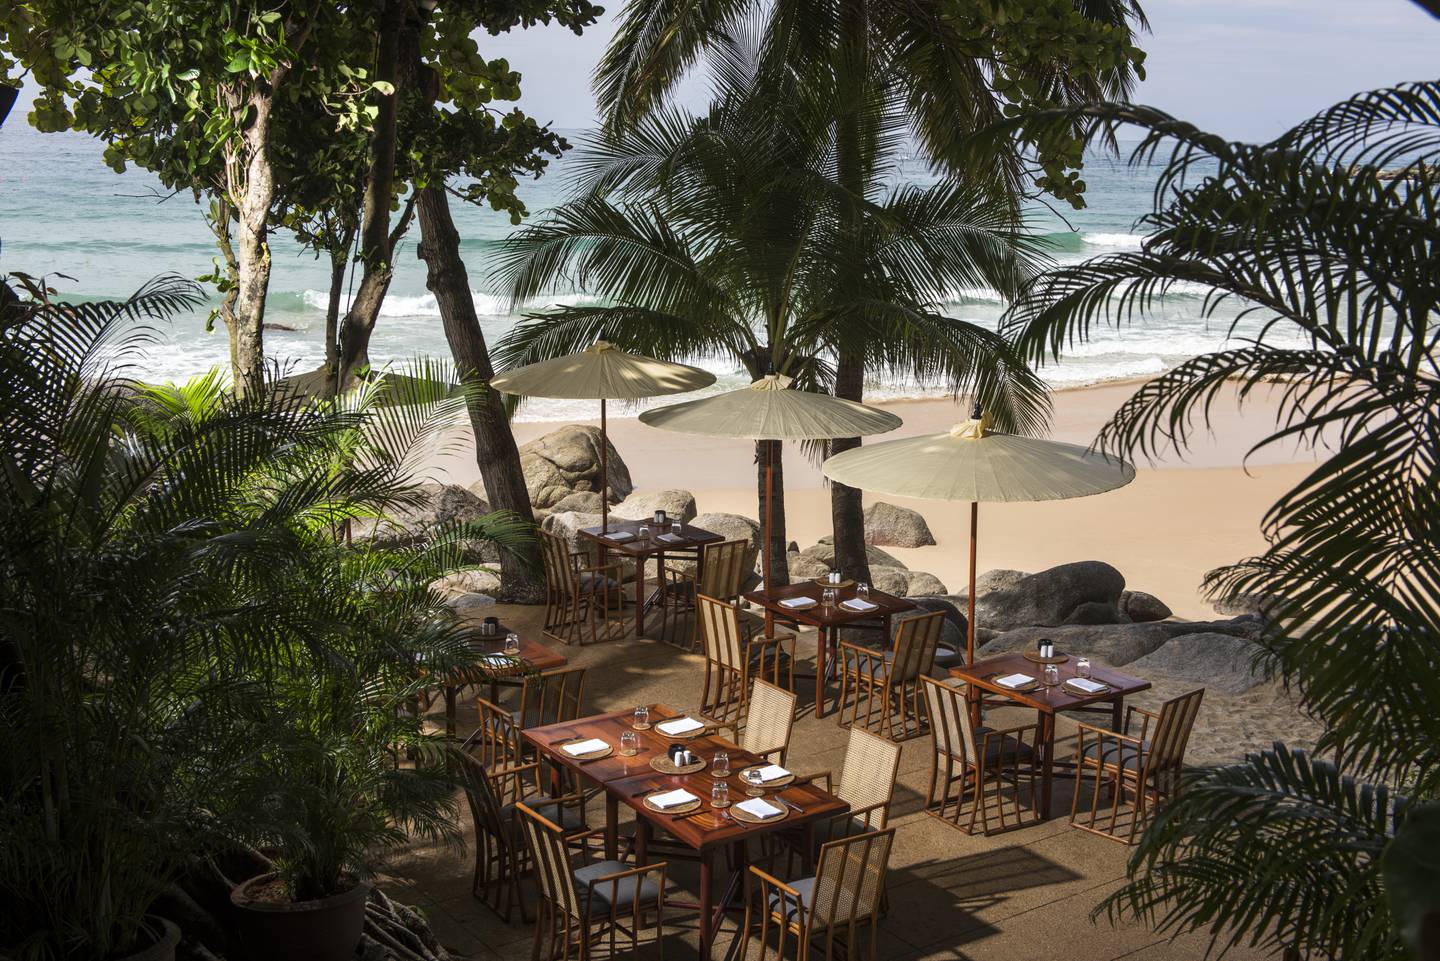 Casual dining at the Beach Terrace, Amanpuri. Photo: Aman esorts